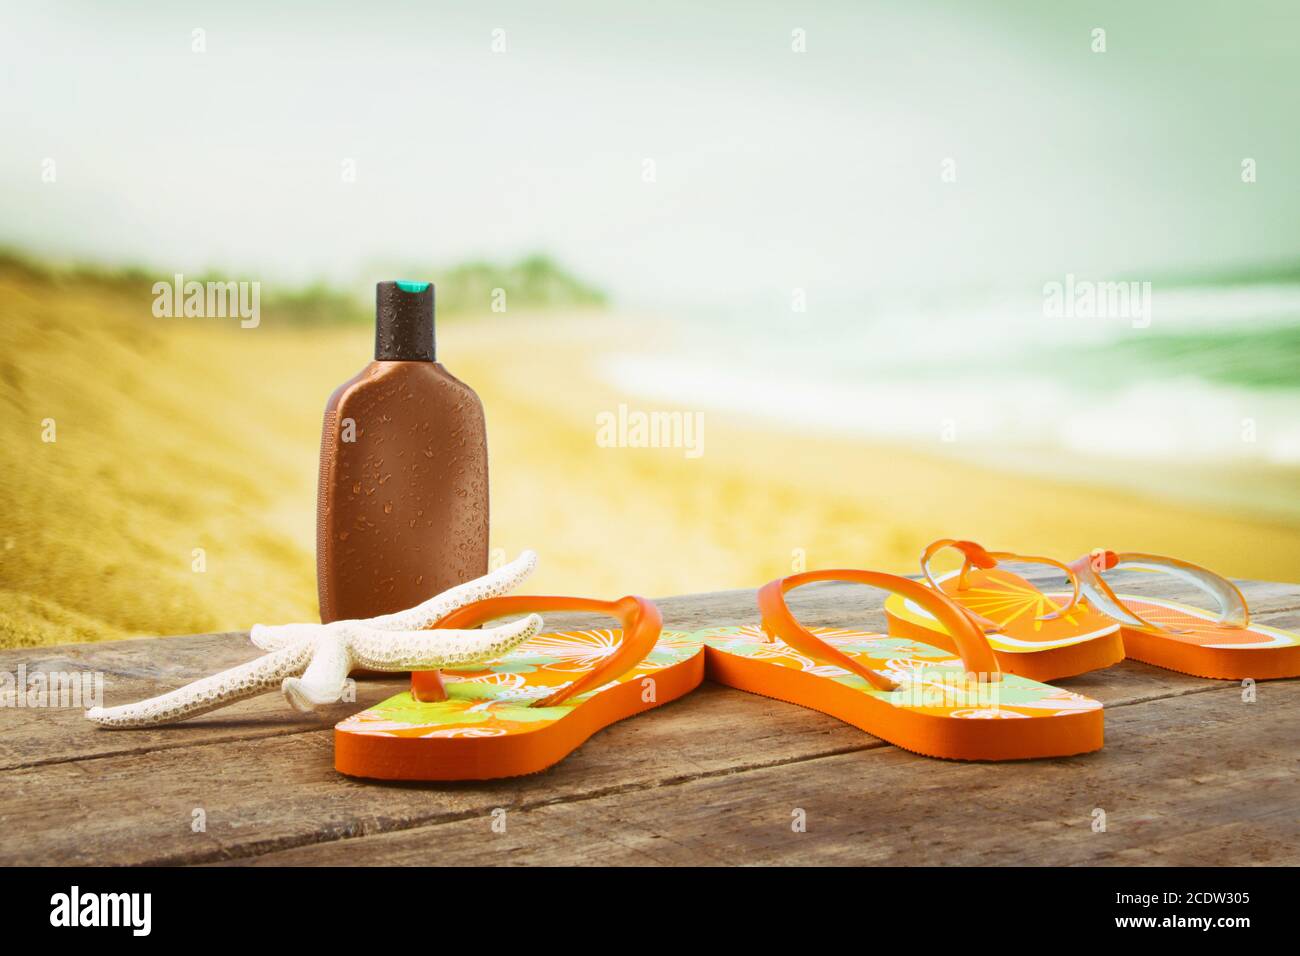 Sunbathing accessories placed on wooden planks at the beach Stock Photo